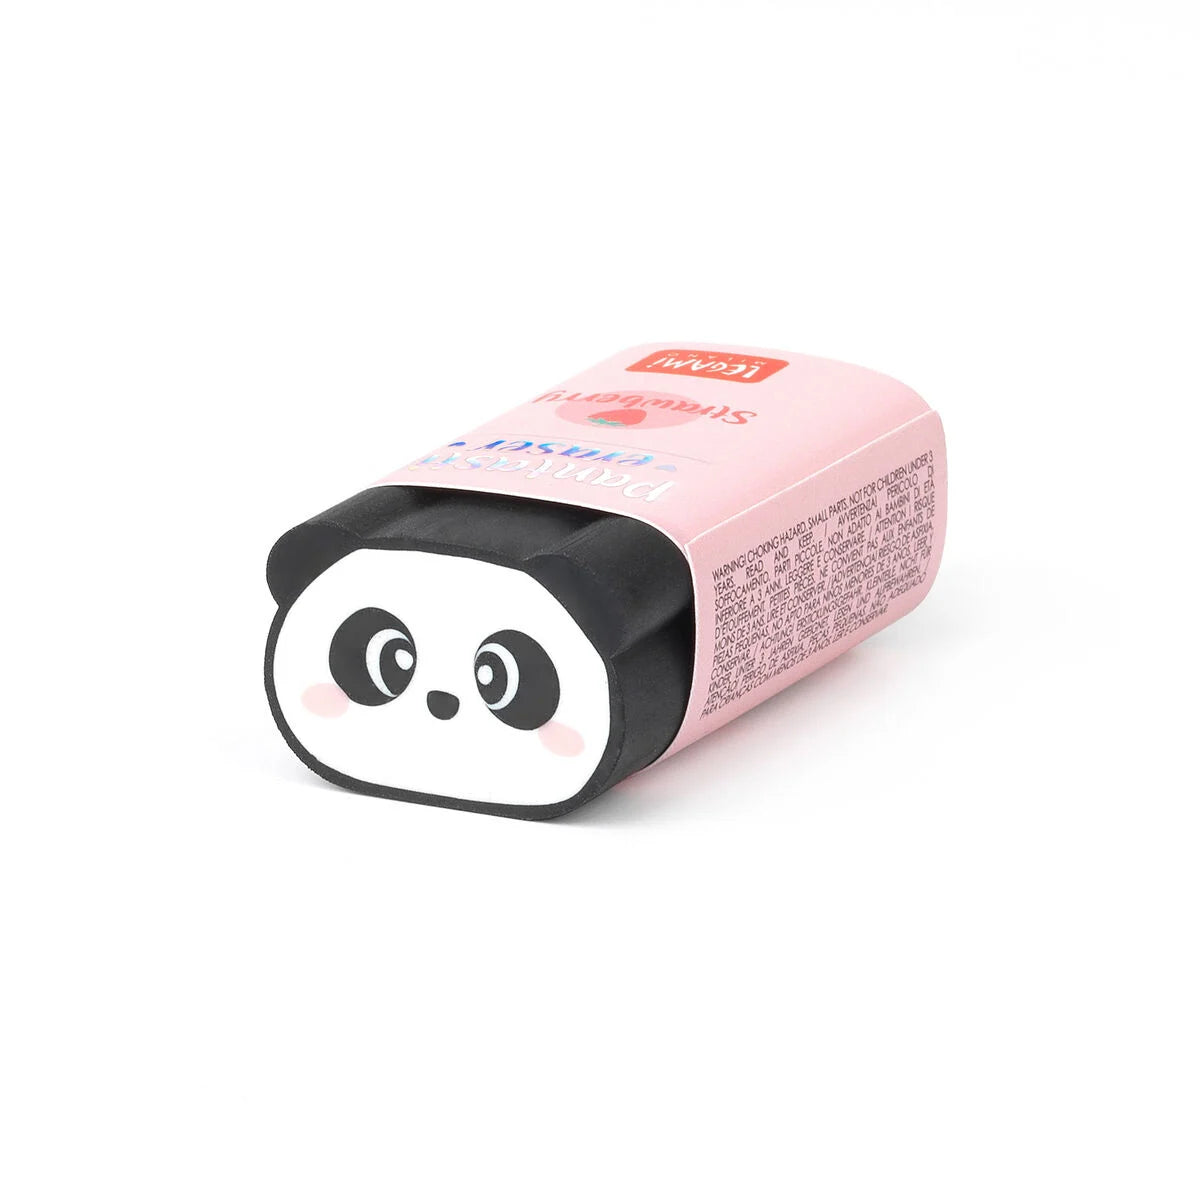 Back to School | Legami Scented Eraser Panda by Weirs of Baggot Street